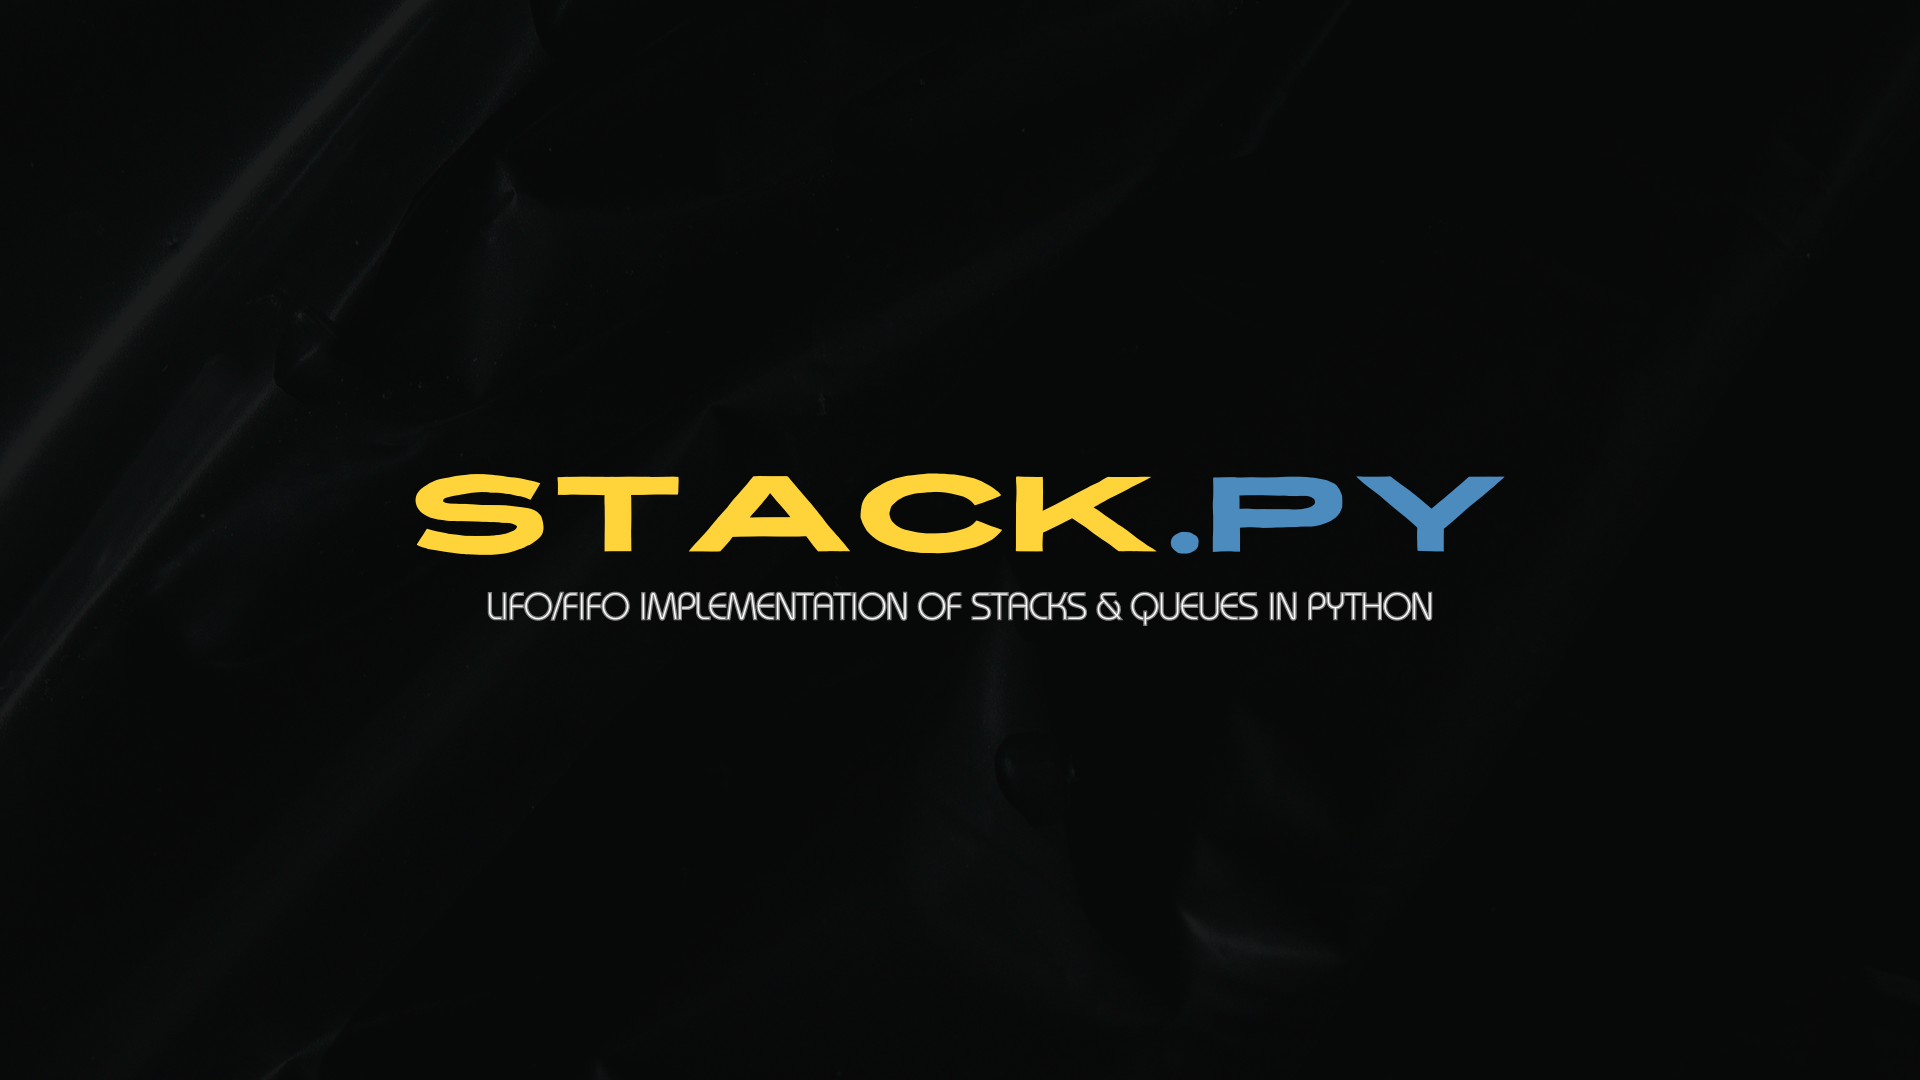 Stack.py - Implementation of Stacks and Queues in Python